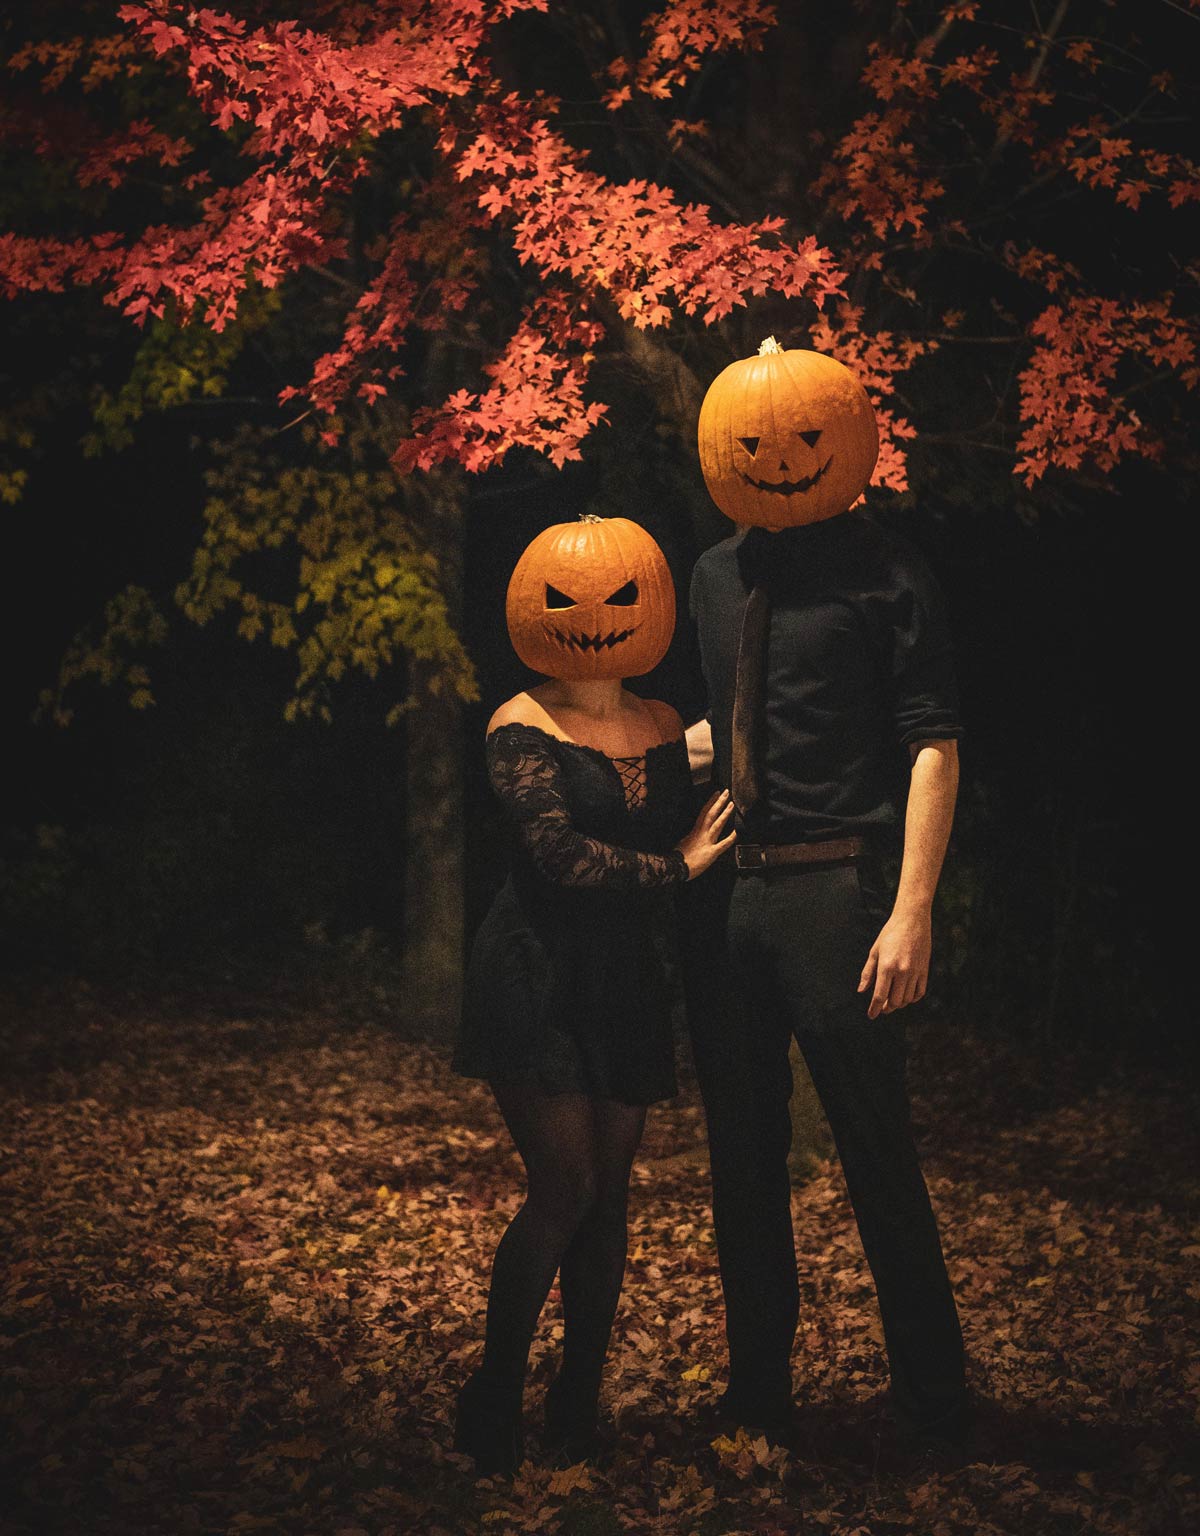 Our Halloween photo this year